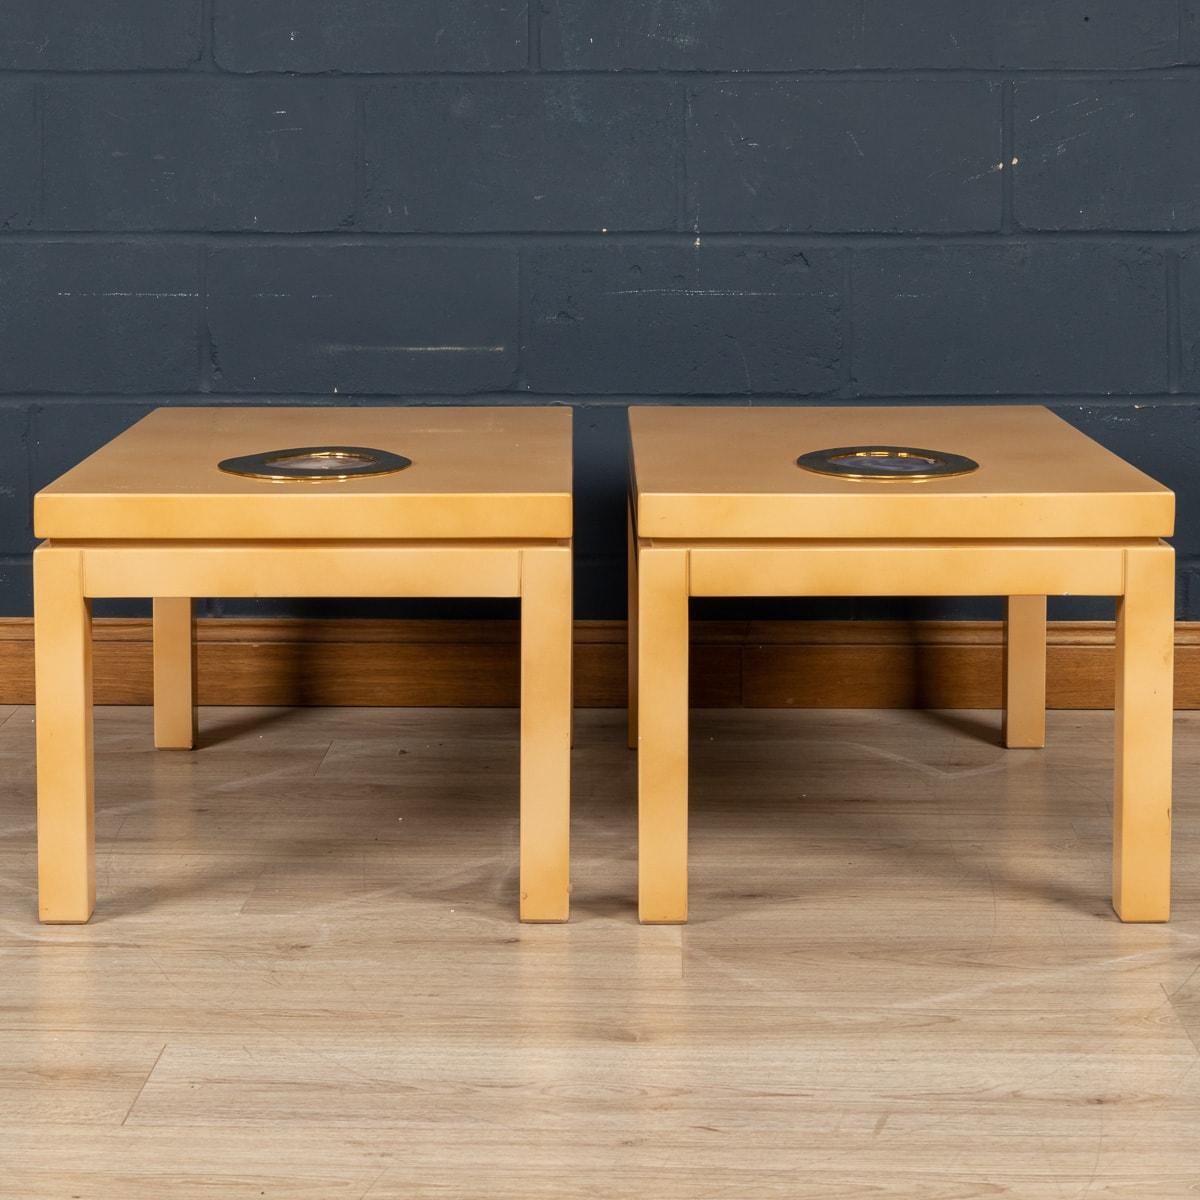 A Pair Of Belgian Lacquered Wood & Agate Side Tables By Willy Daro, c.1970 For Sale 5